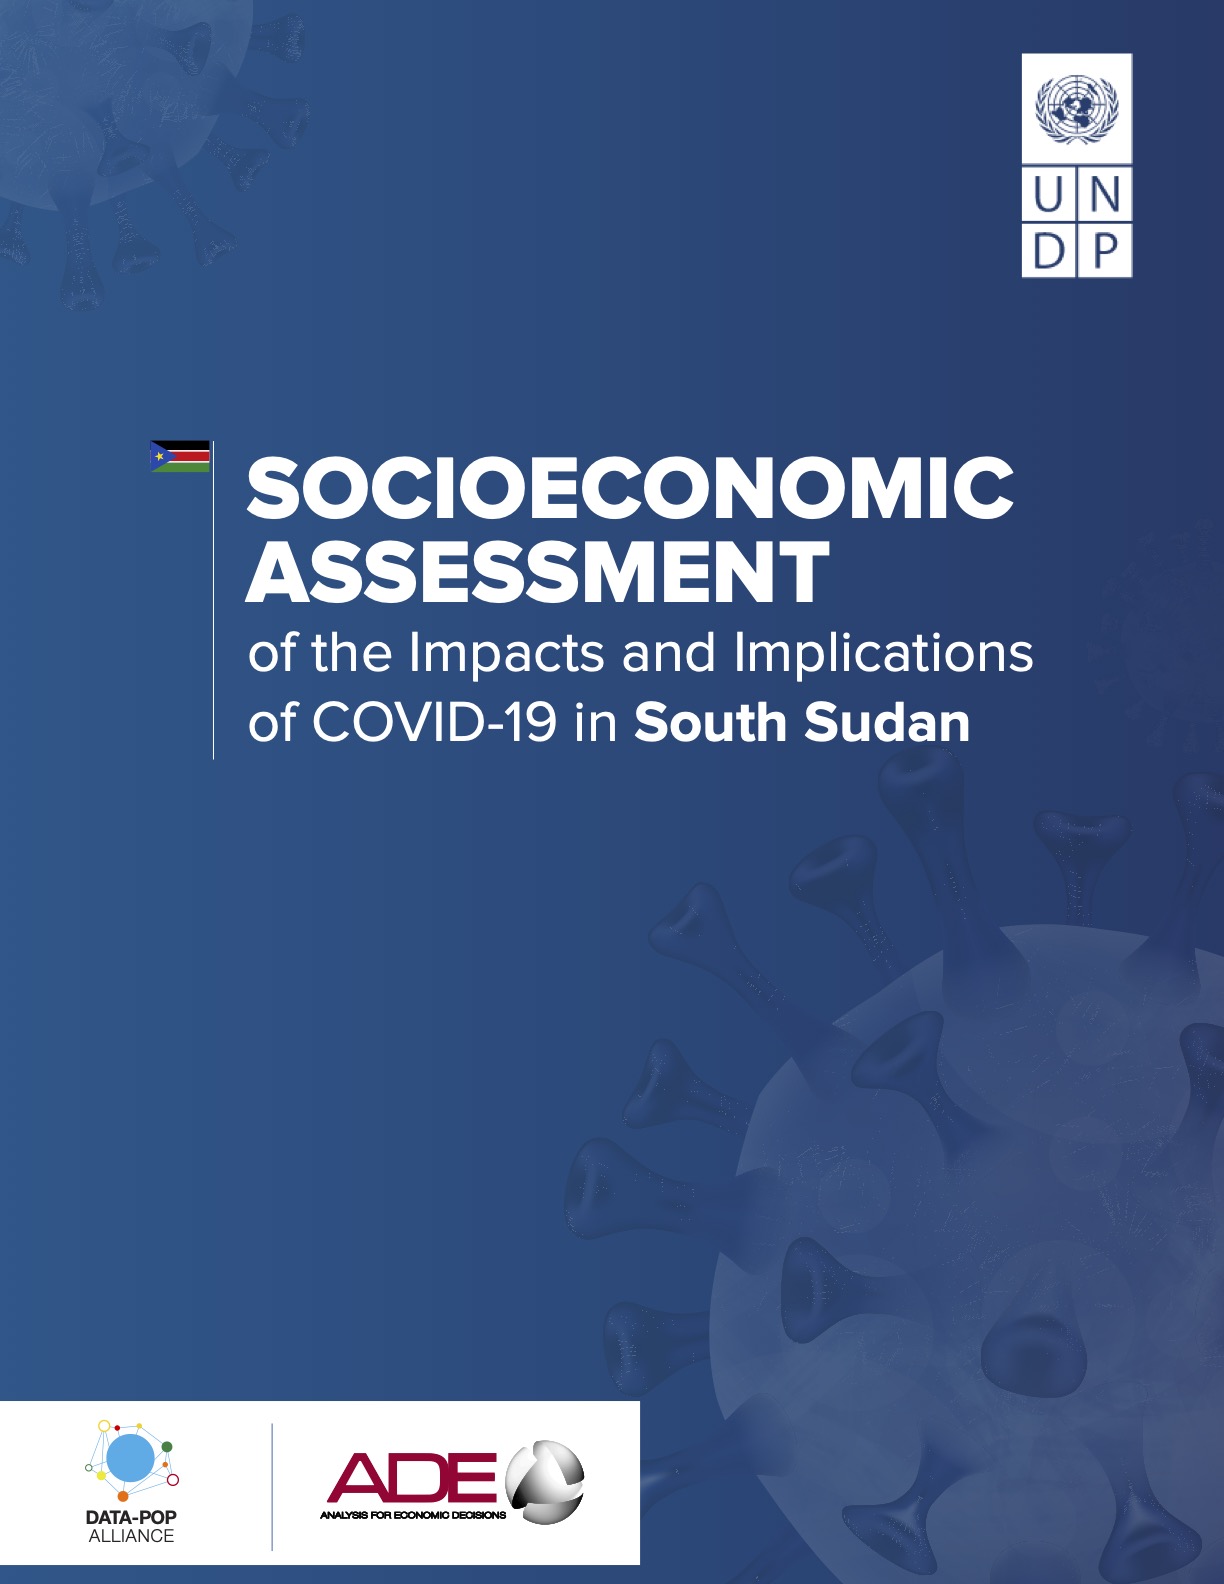 Socioeconomic Assessment of the Impacts and Implications of COVID-19 in South Sudan